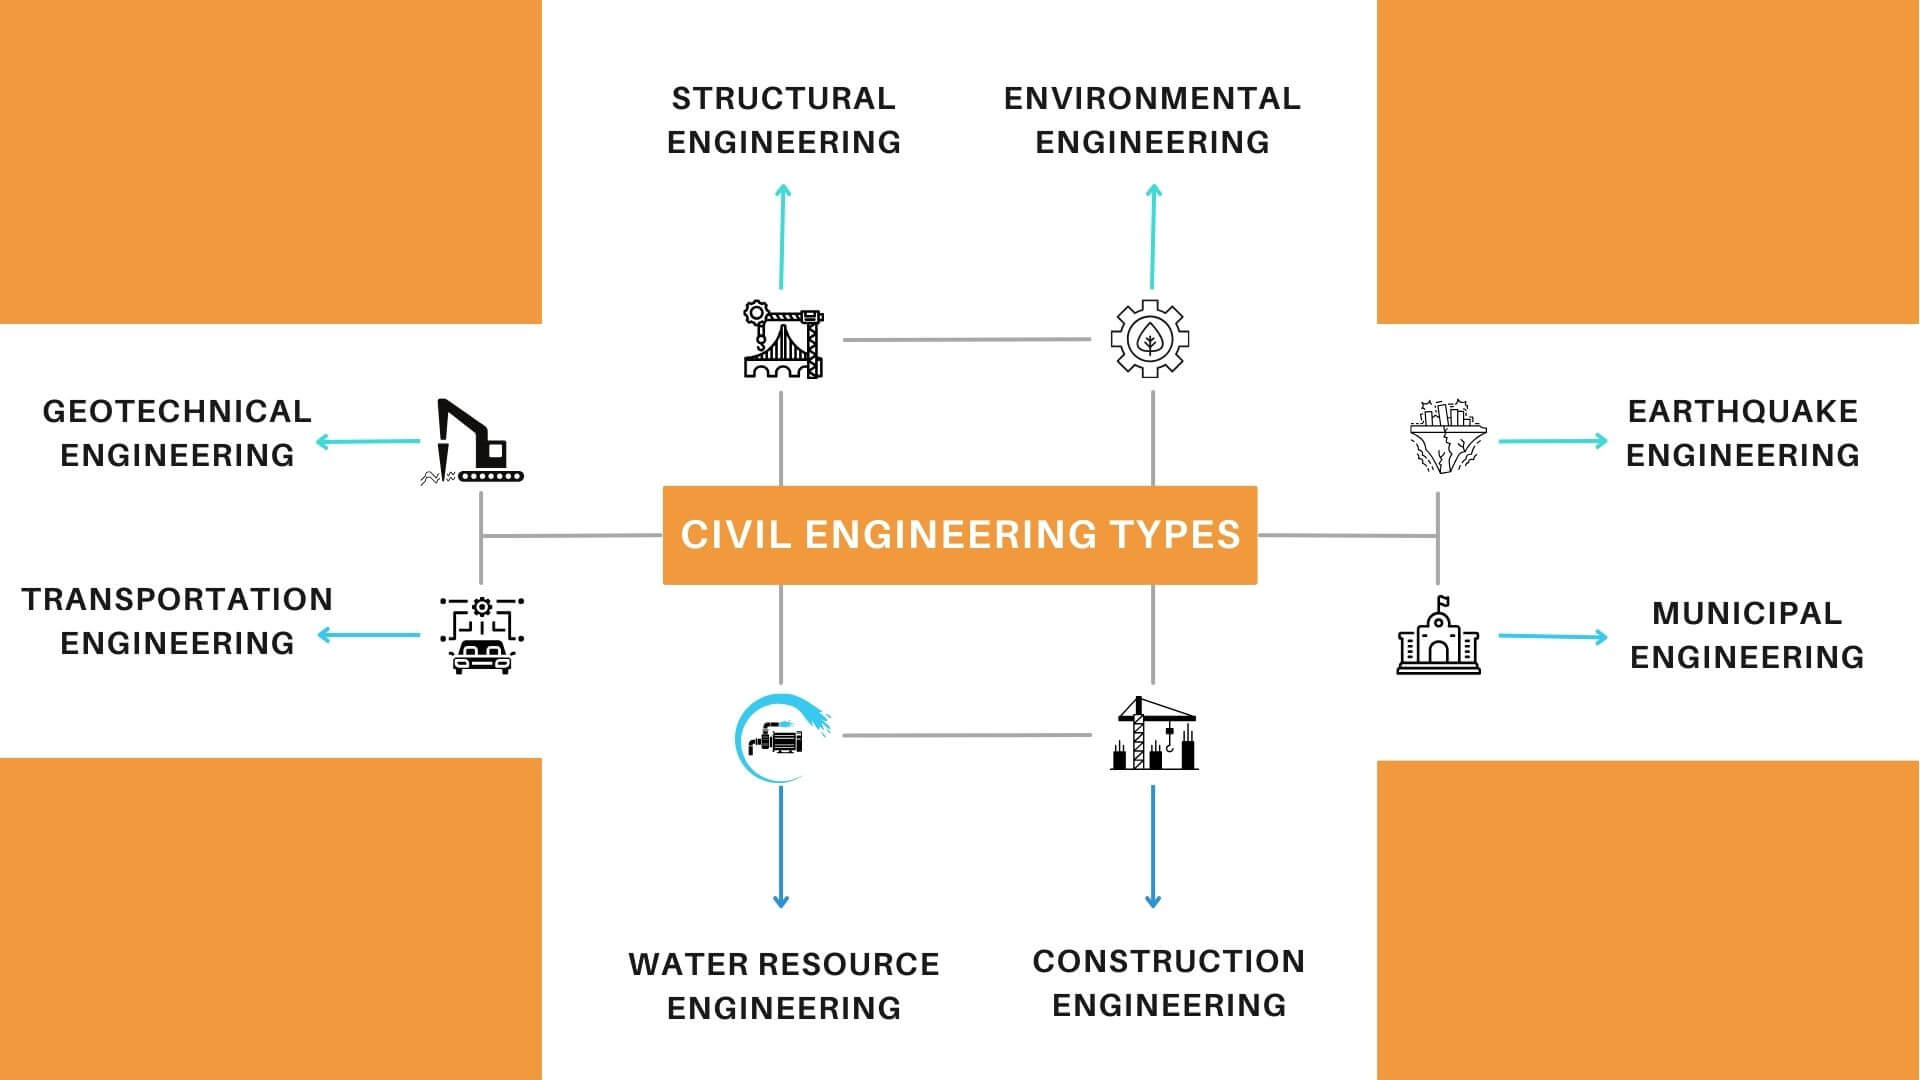 DIFFERENT TYPES OF CIVIL ENGINEERING